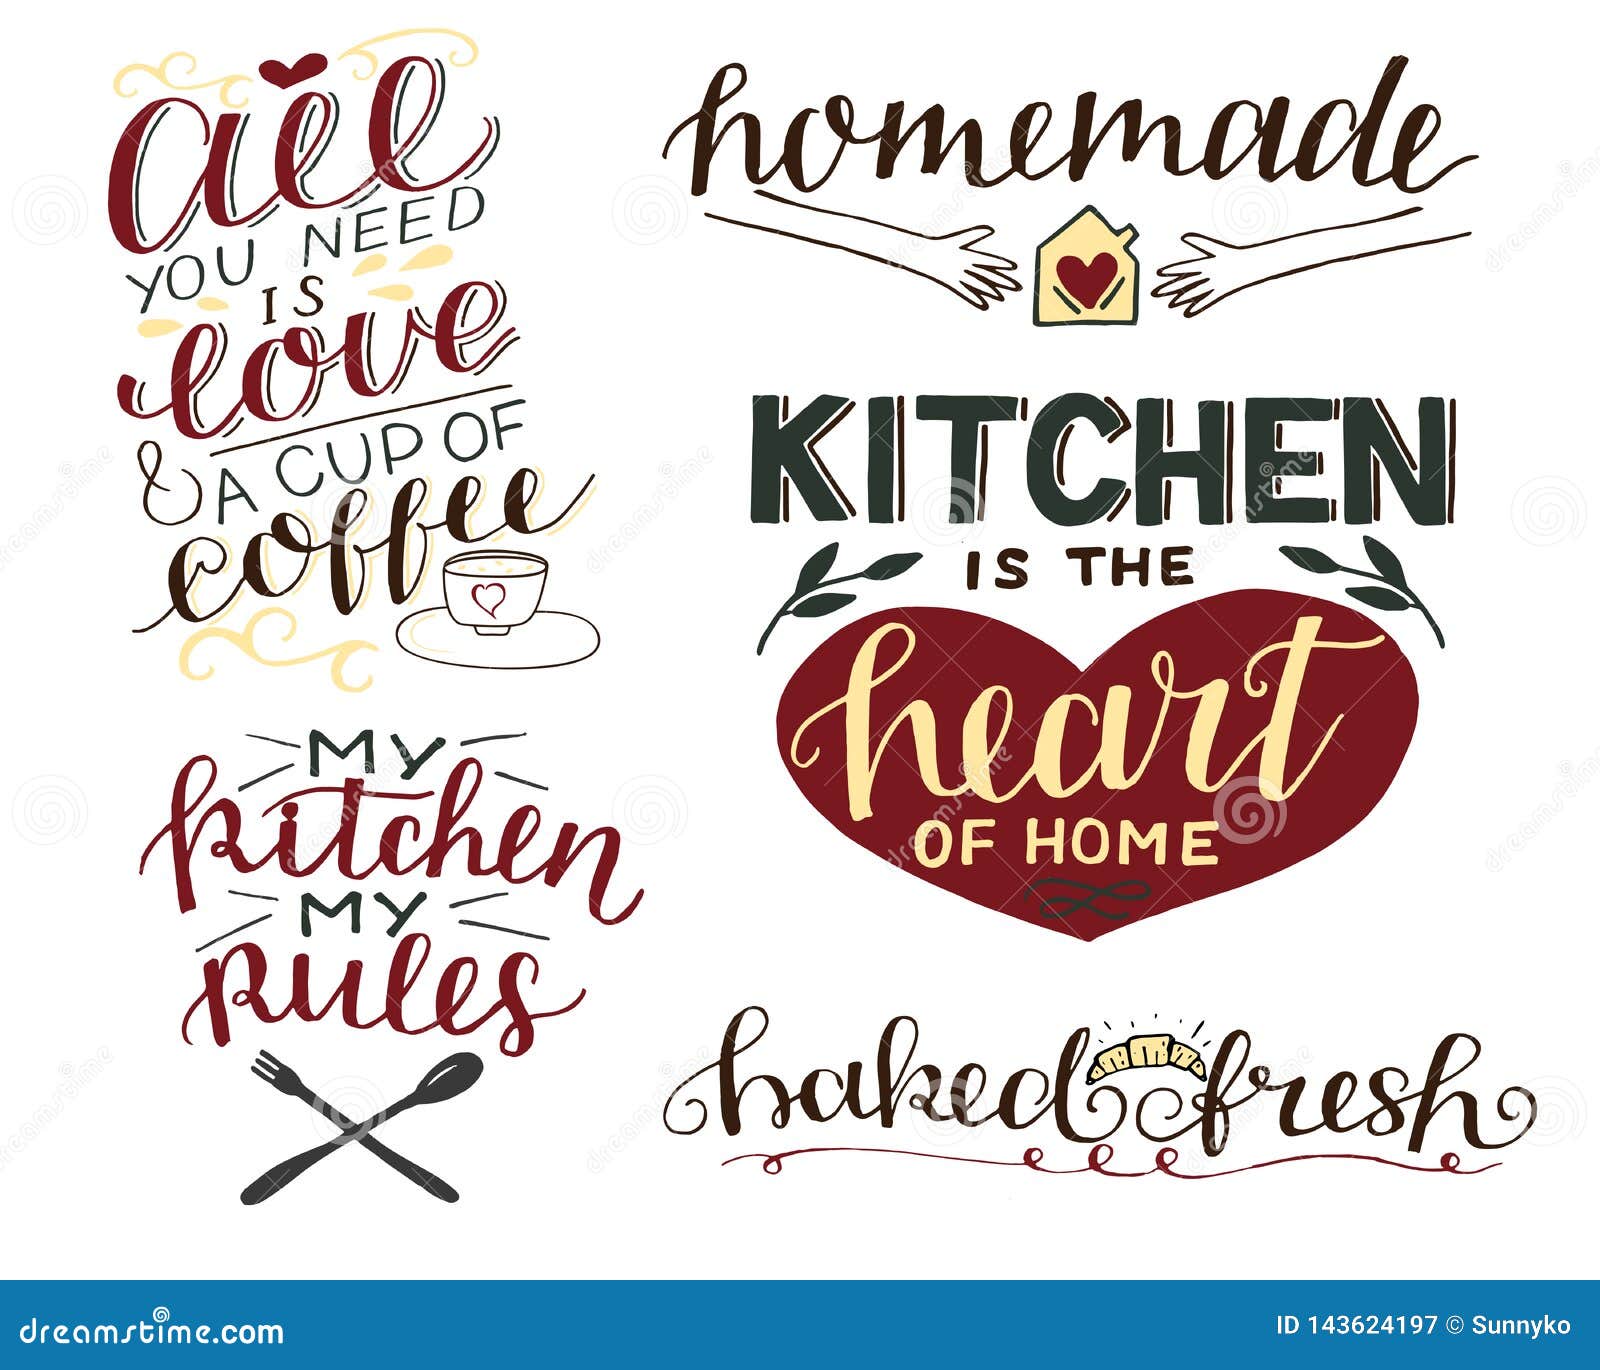 5 Hand Lettering Quotes About Food All You Need Is Love And Cup Of Coffee Kitchen Is The Heart Of Home Homemade Baked Fresh Stock Illustration Illustration Of Cafeteria Cooking 143624197